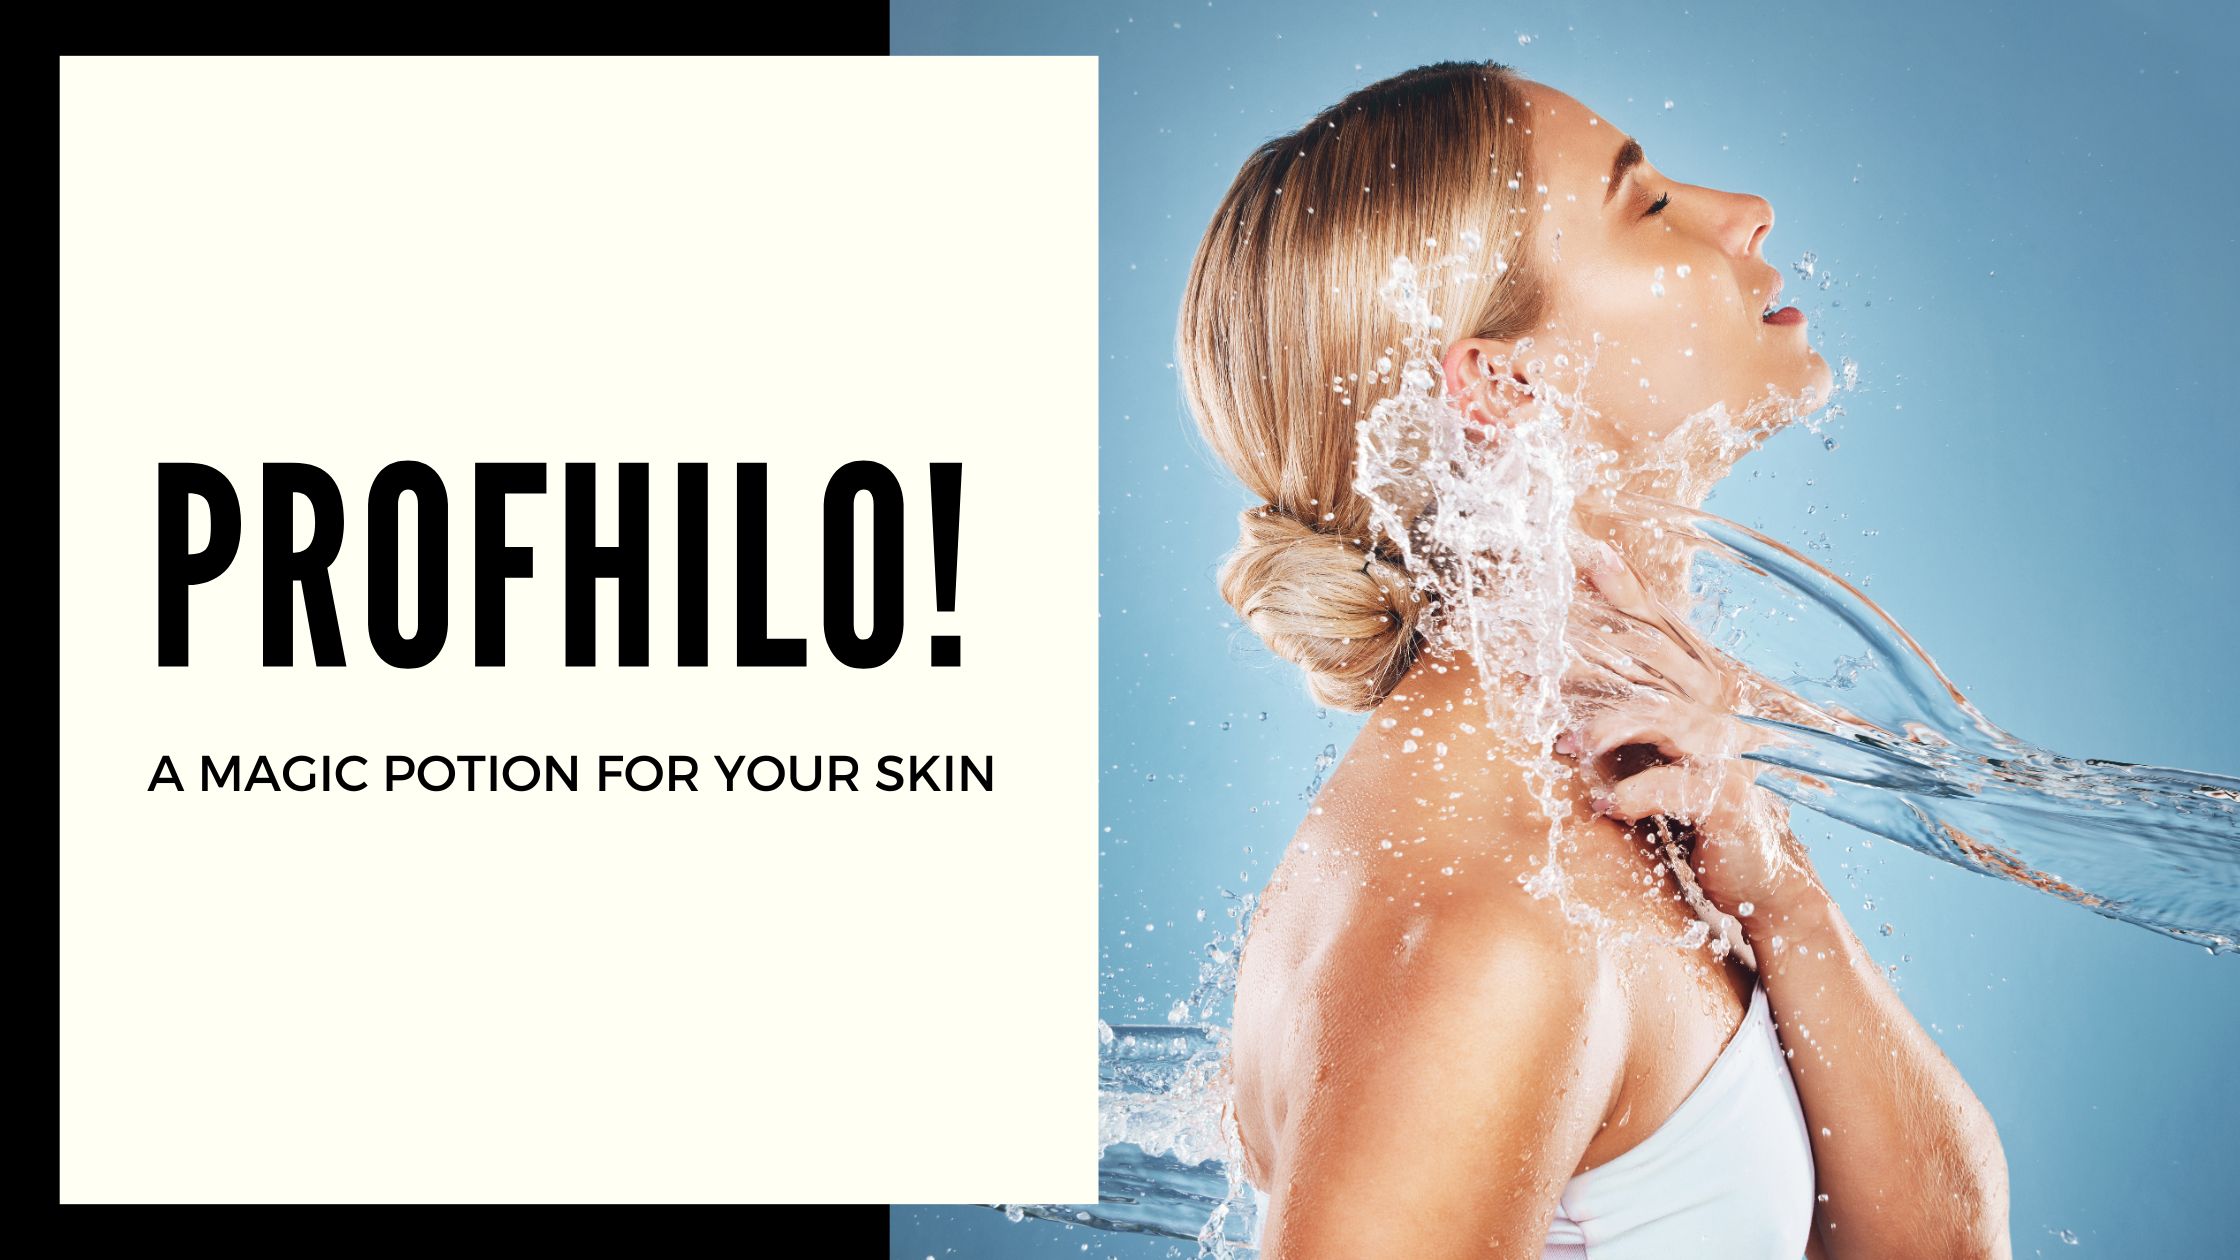 You are currently viewing The Magic Potion for Your Skin: Profhilo!